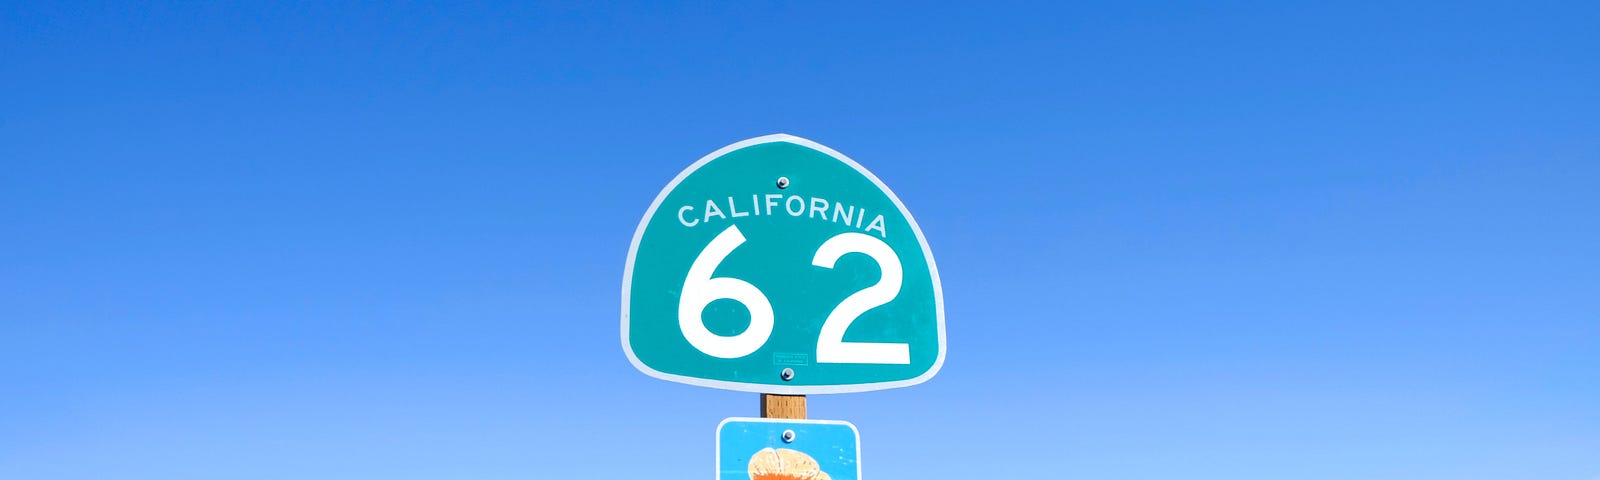 California Highway Sign with number 62 displayed. Desert and scrub displayed in the background to the right, with the highway long perspective shown to the left.